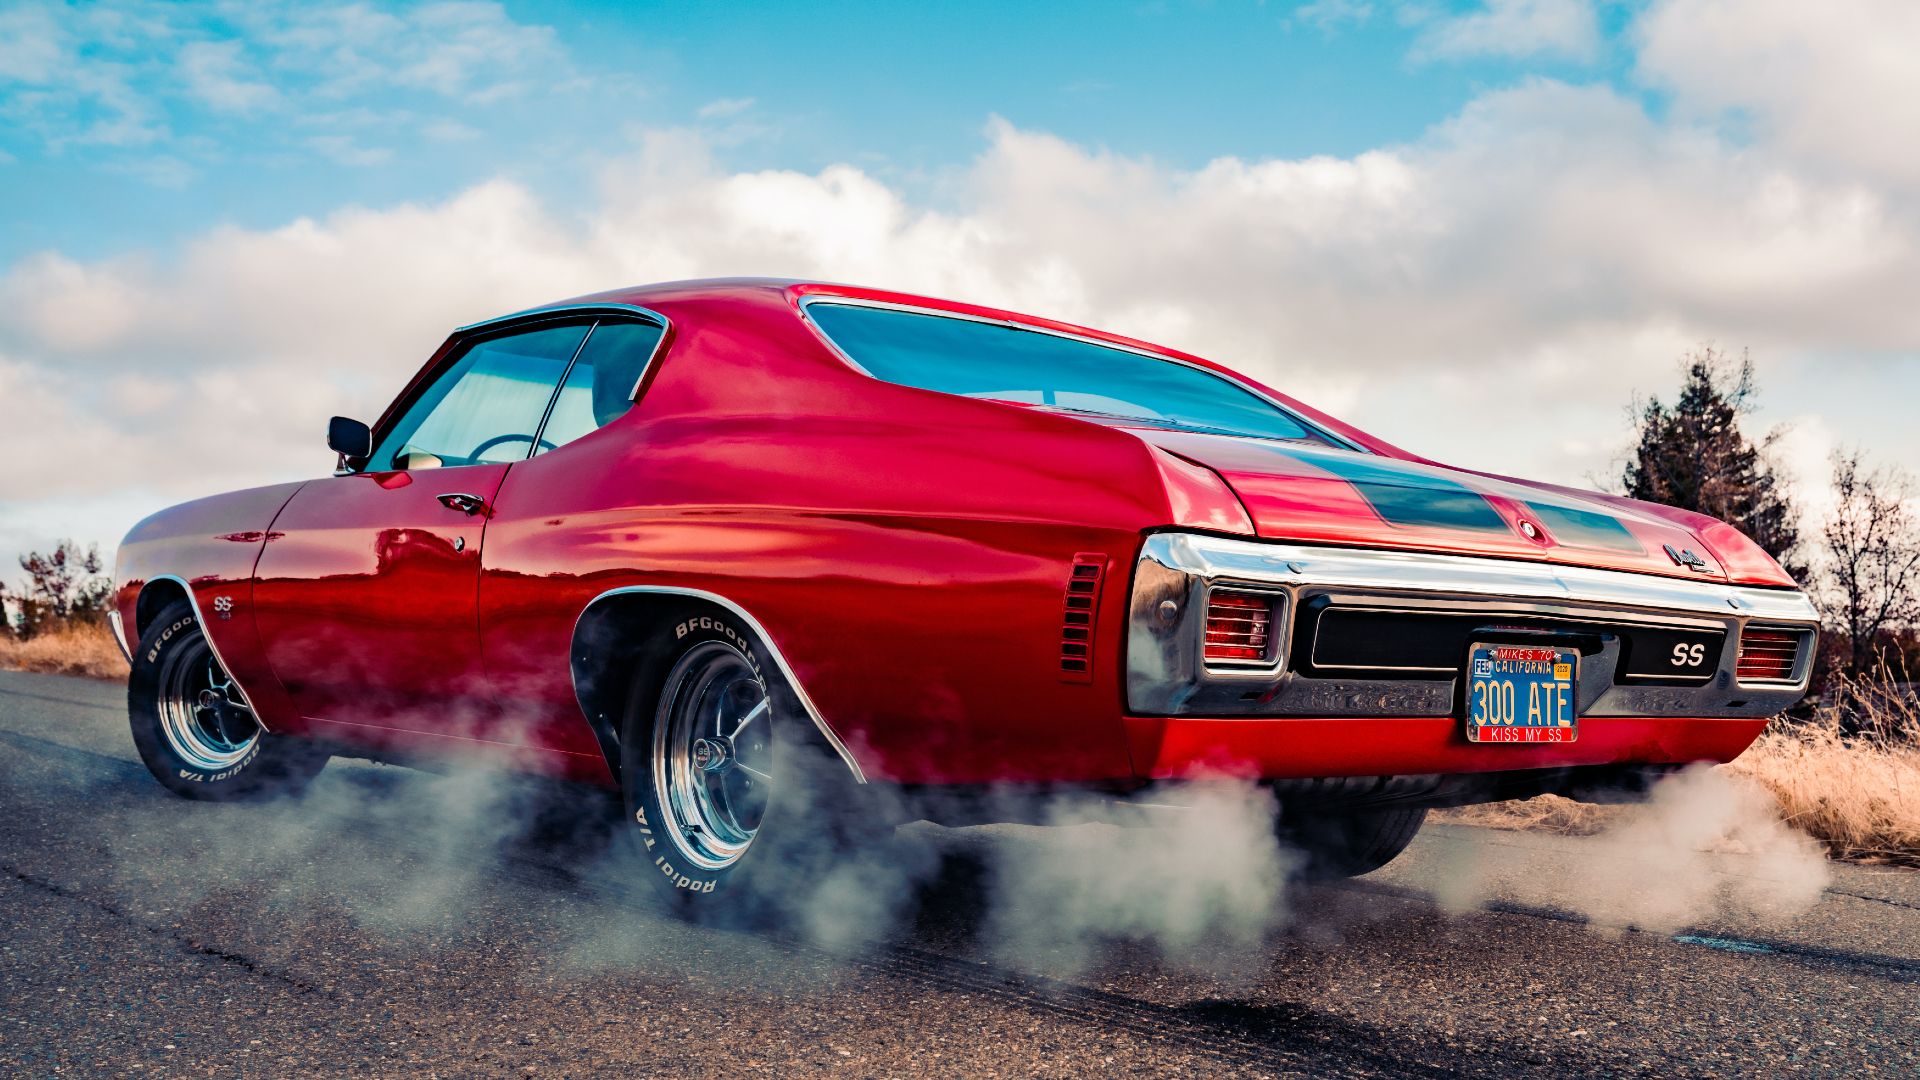 1970 Chevrolet Chevelle SS doing a burnout on a empty street